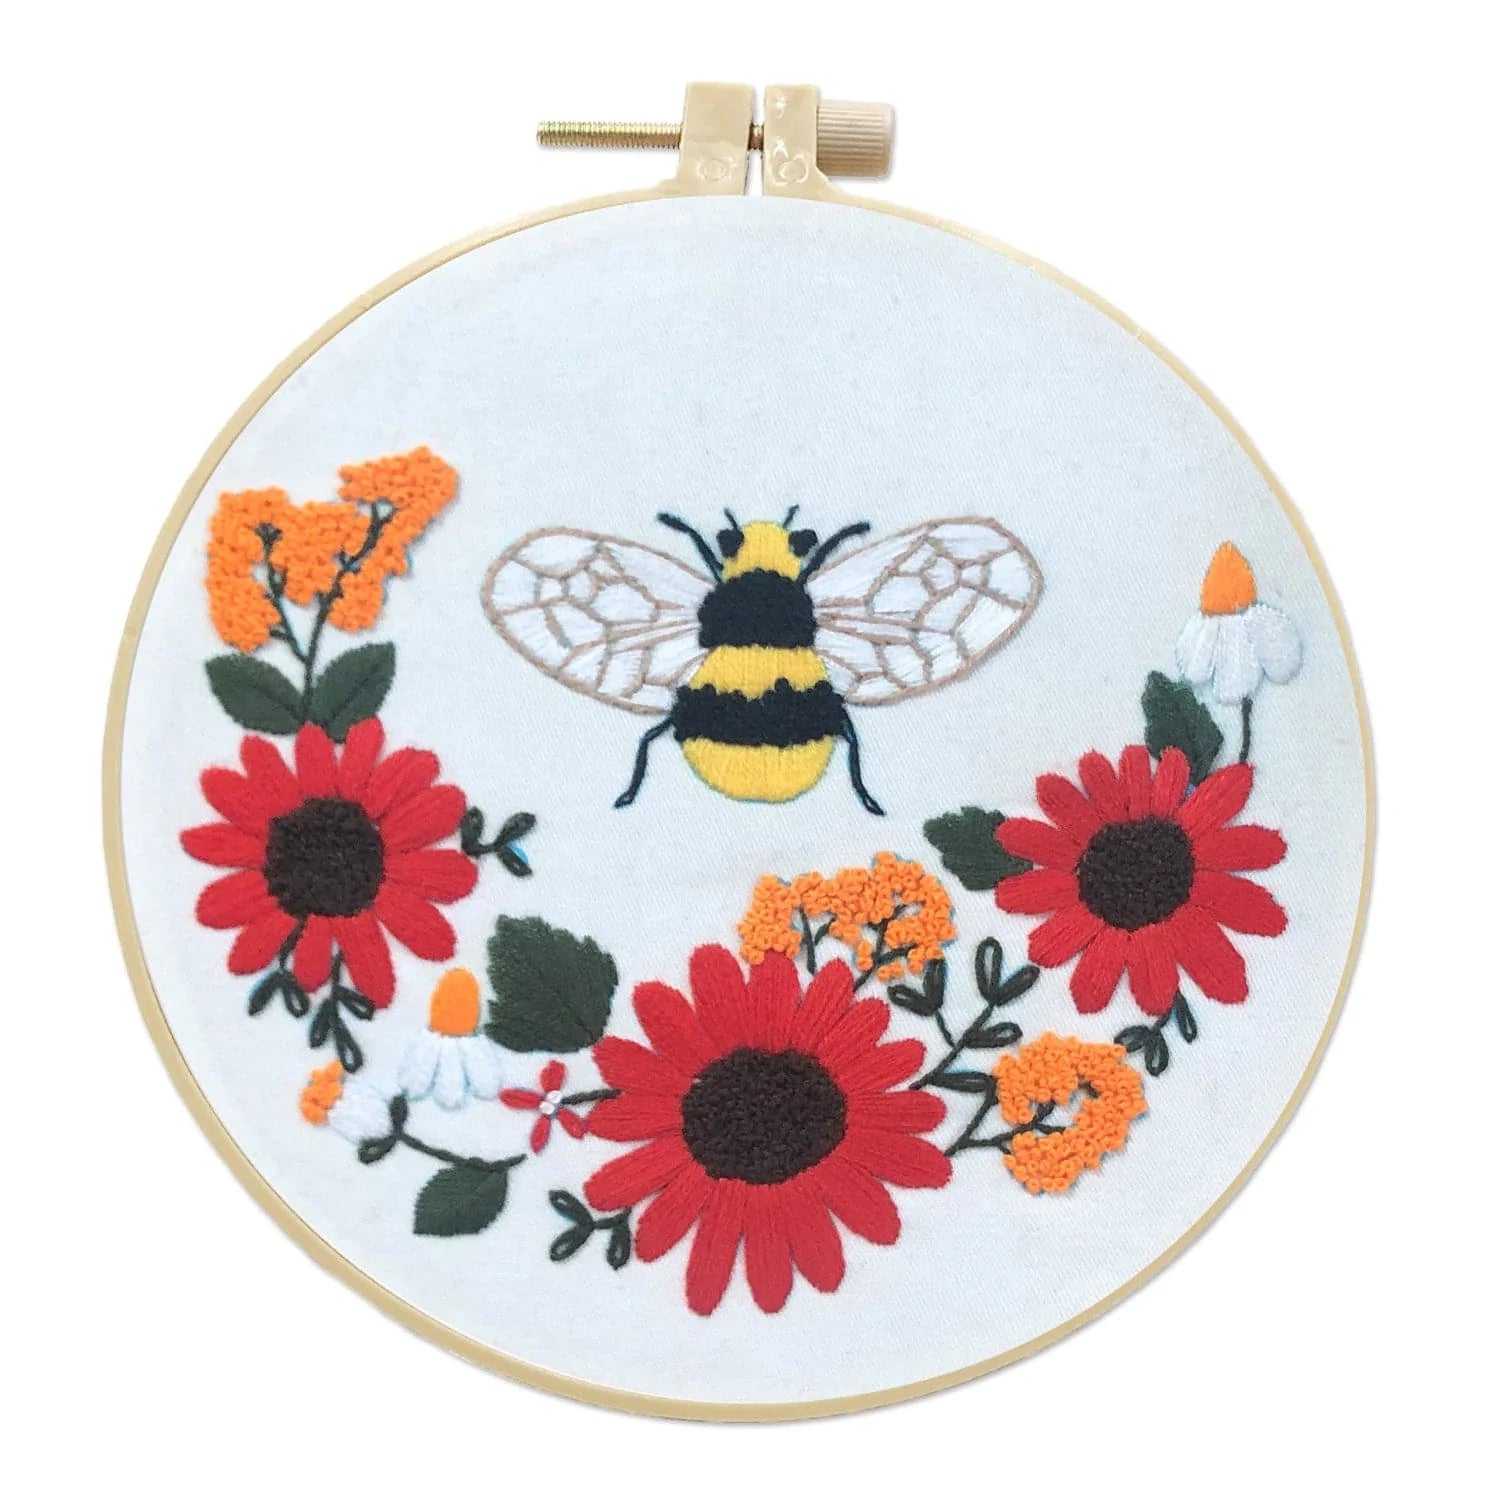 Insects and flowers - Embroidery ktclubs.com